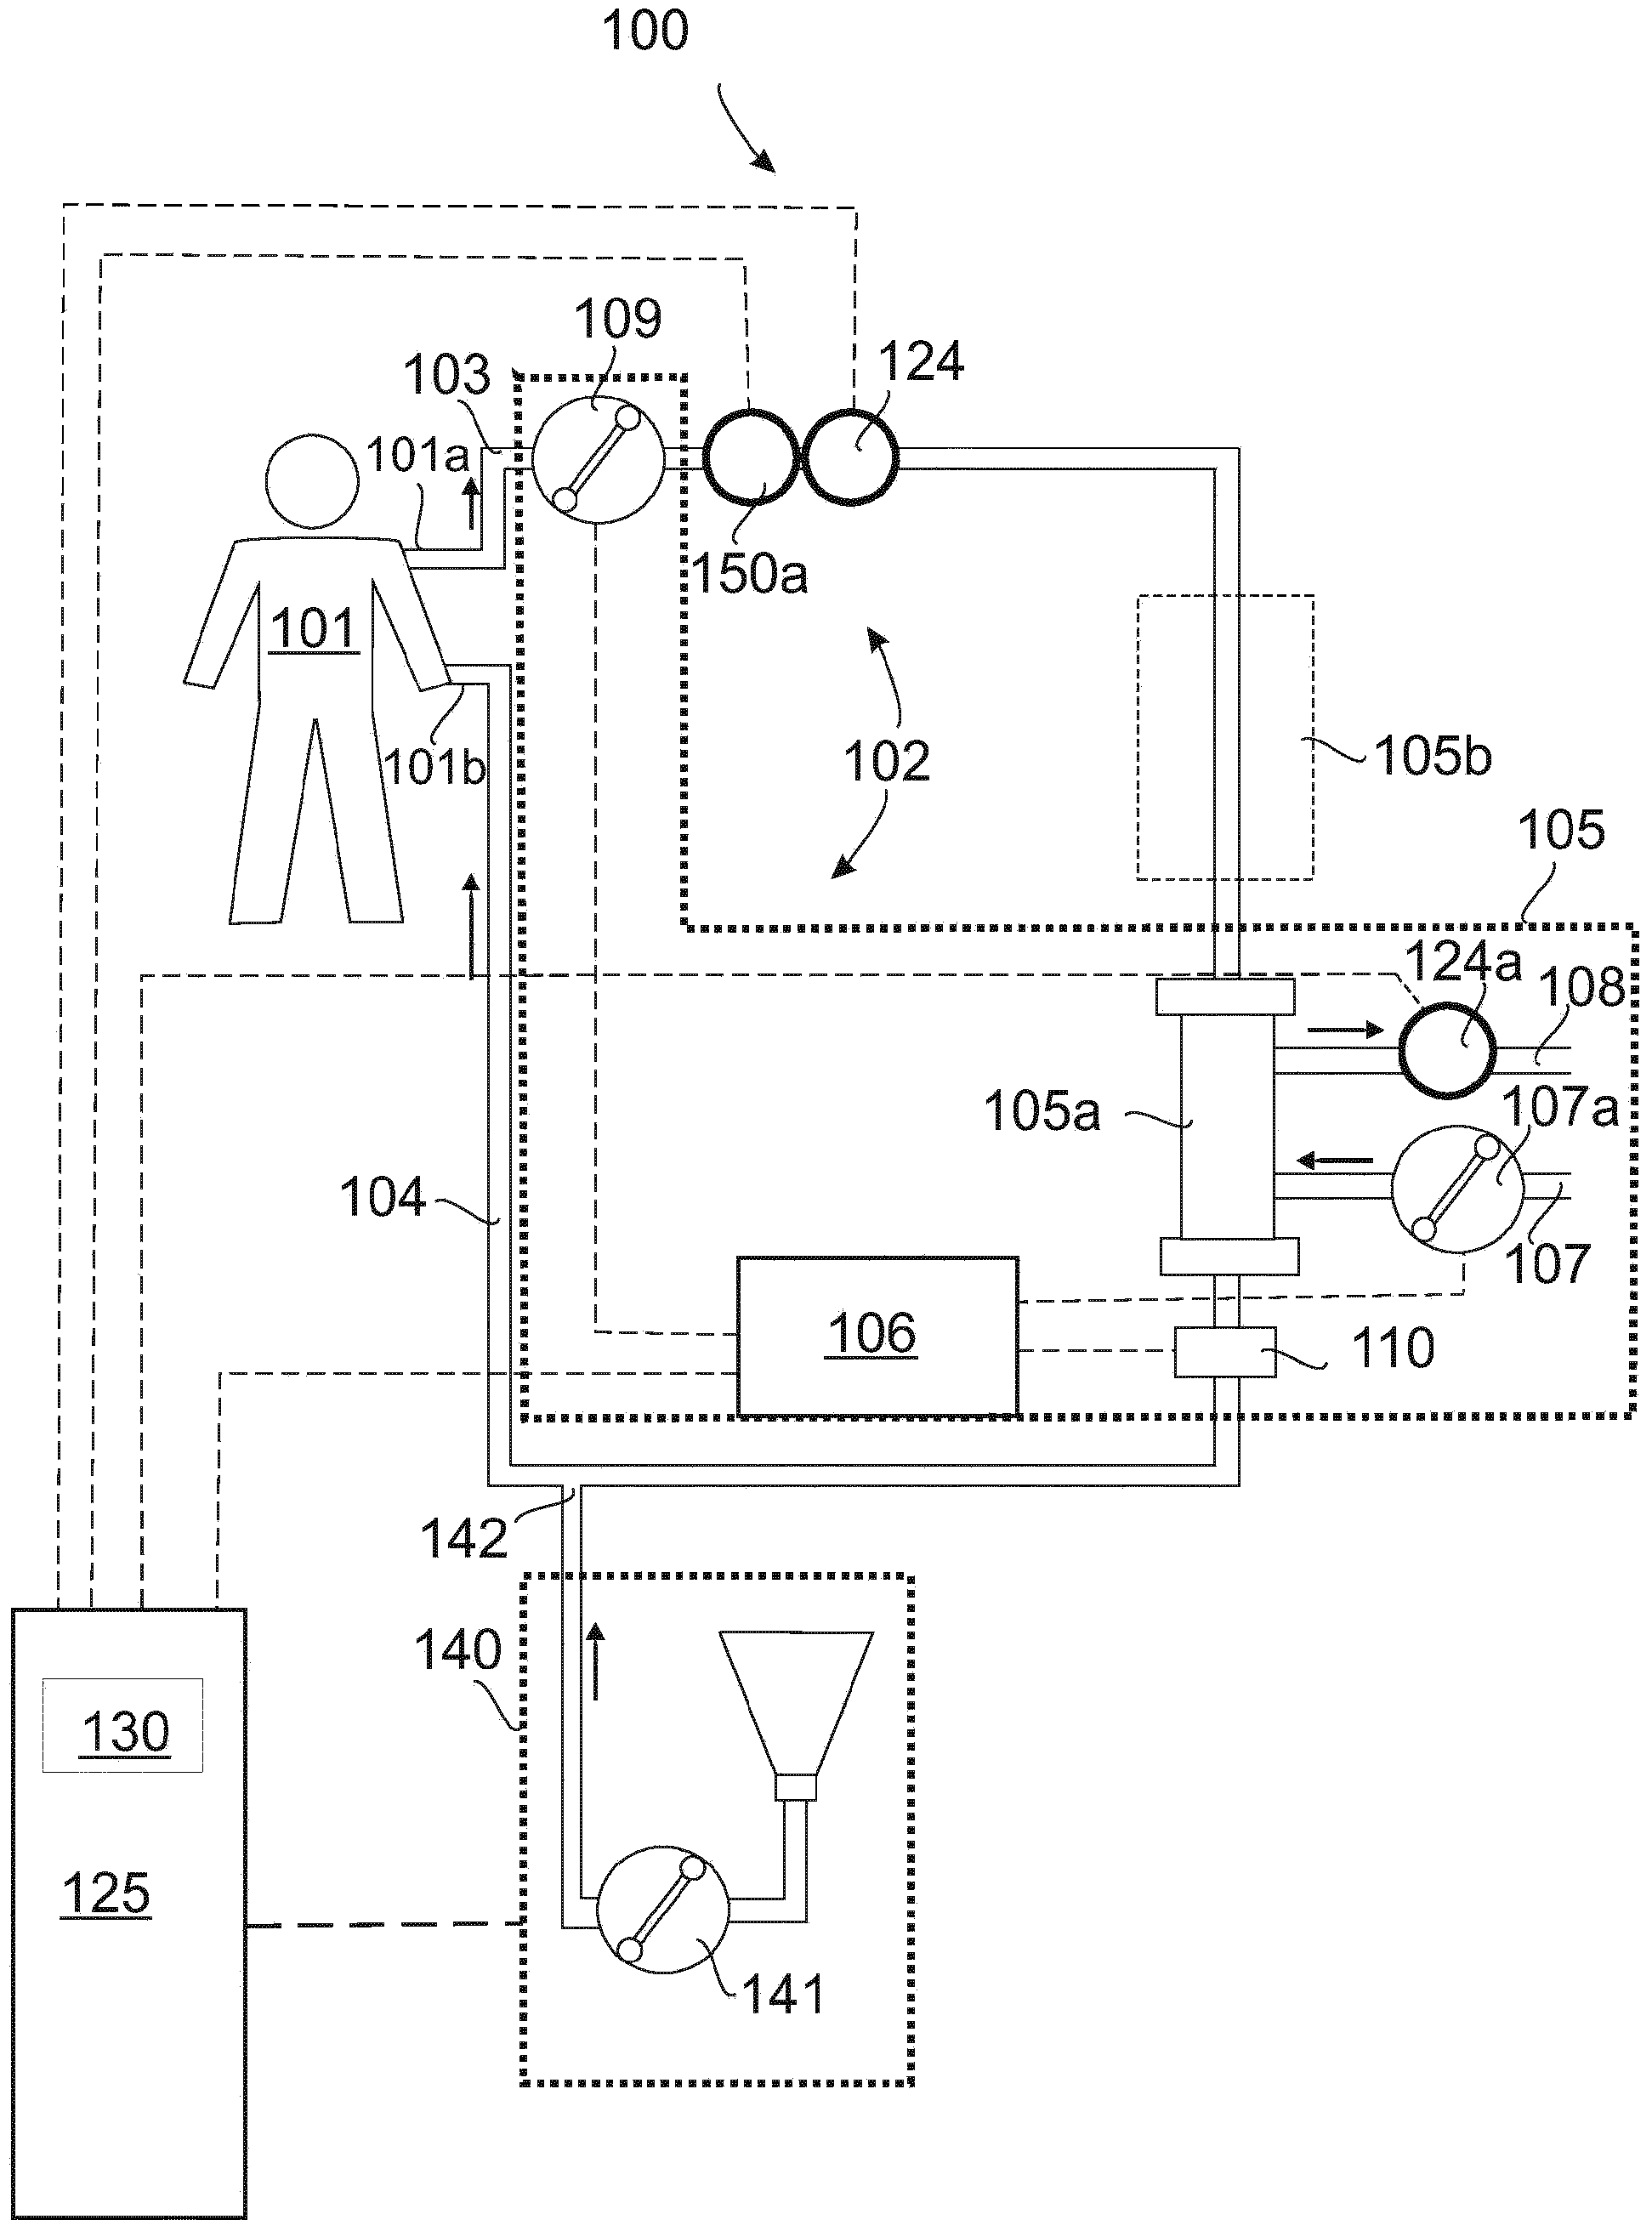 Safety apparatus for extracorporeal blood treatment